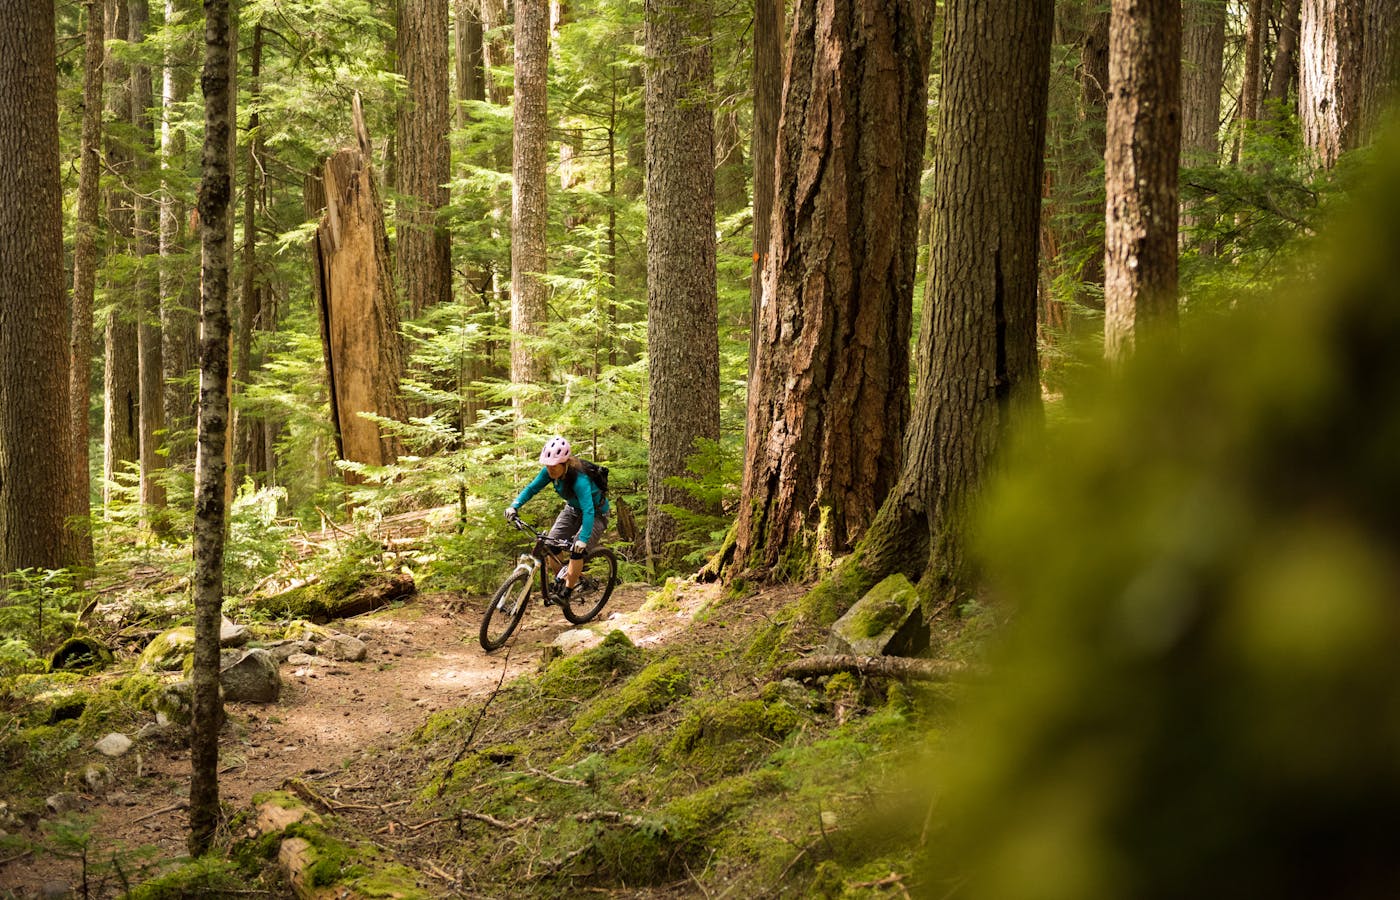 Great Smoky Mountains National Park Moves Forward With Mountain Bike Trail Plan - 5c5ee0b9 8f4f 41b0 9a43 6d1f7beda7b1 iStock 628217586